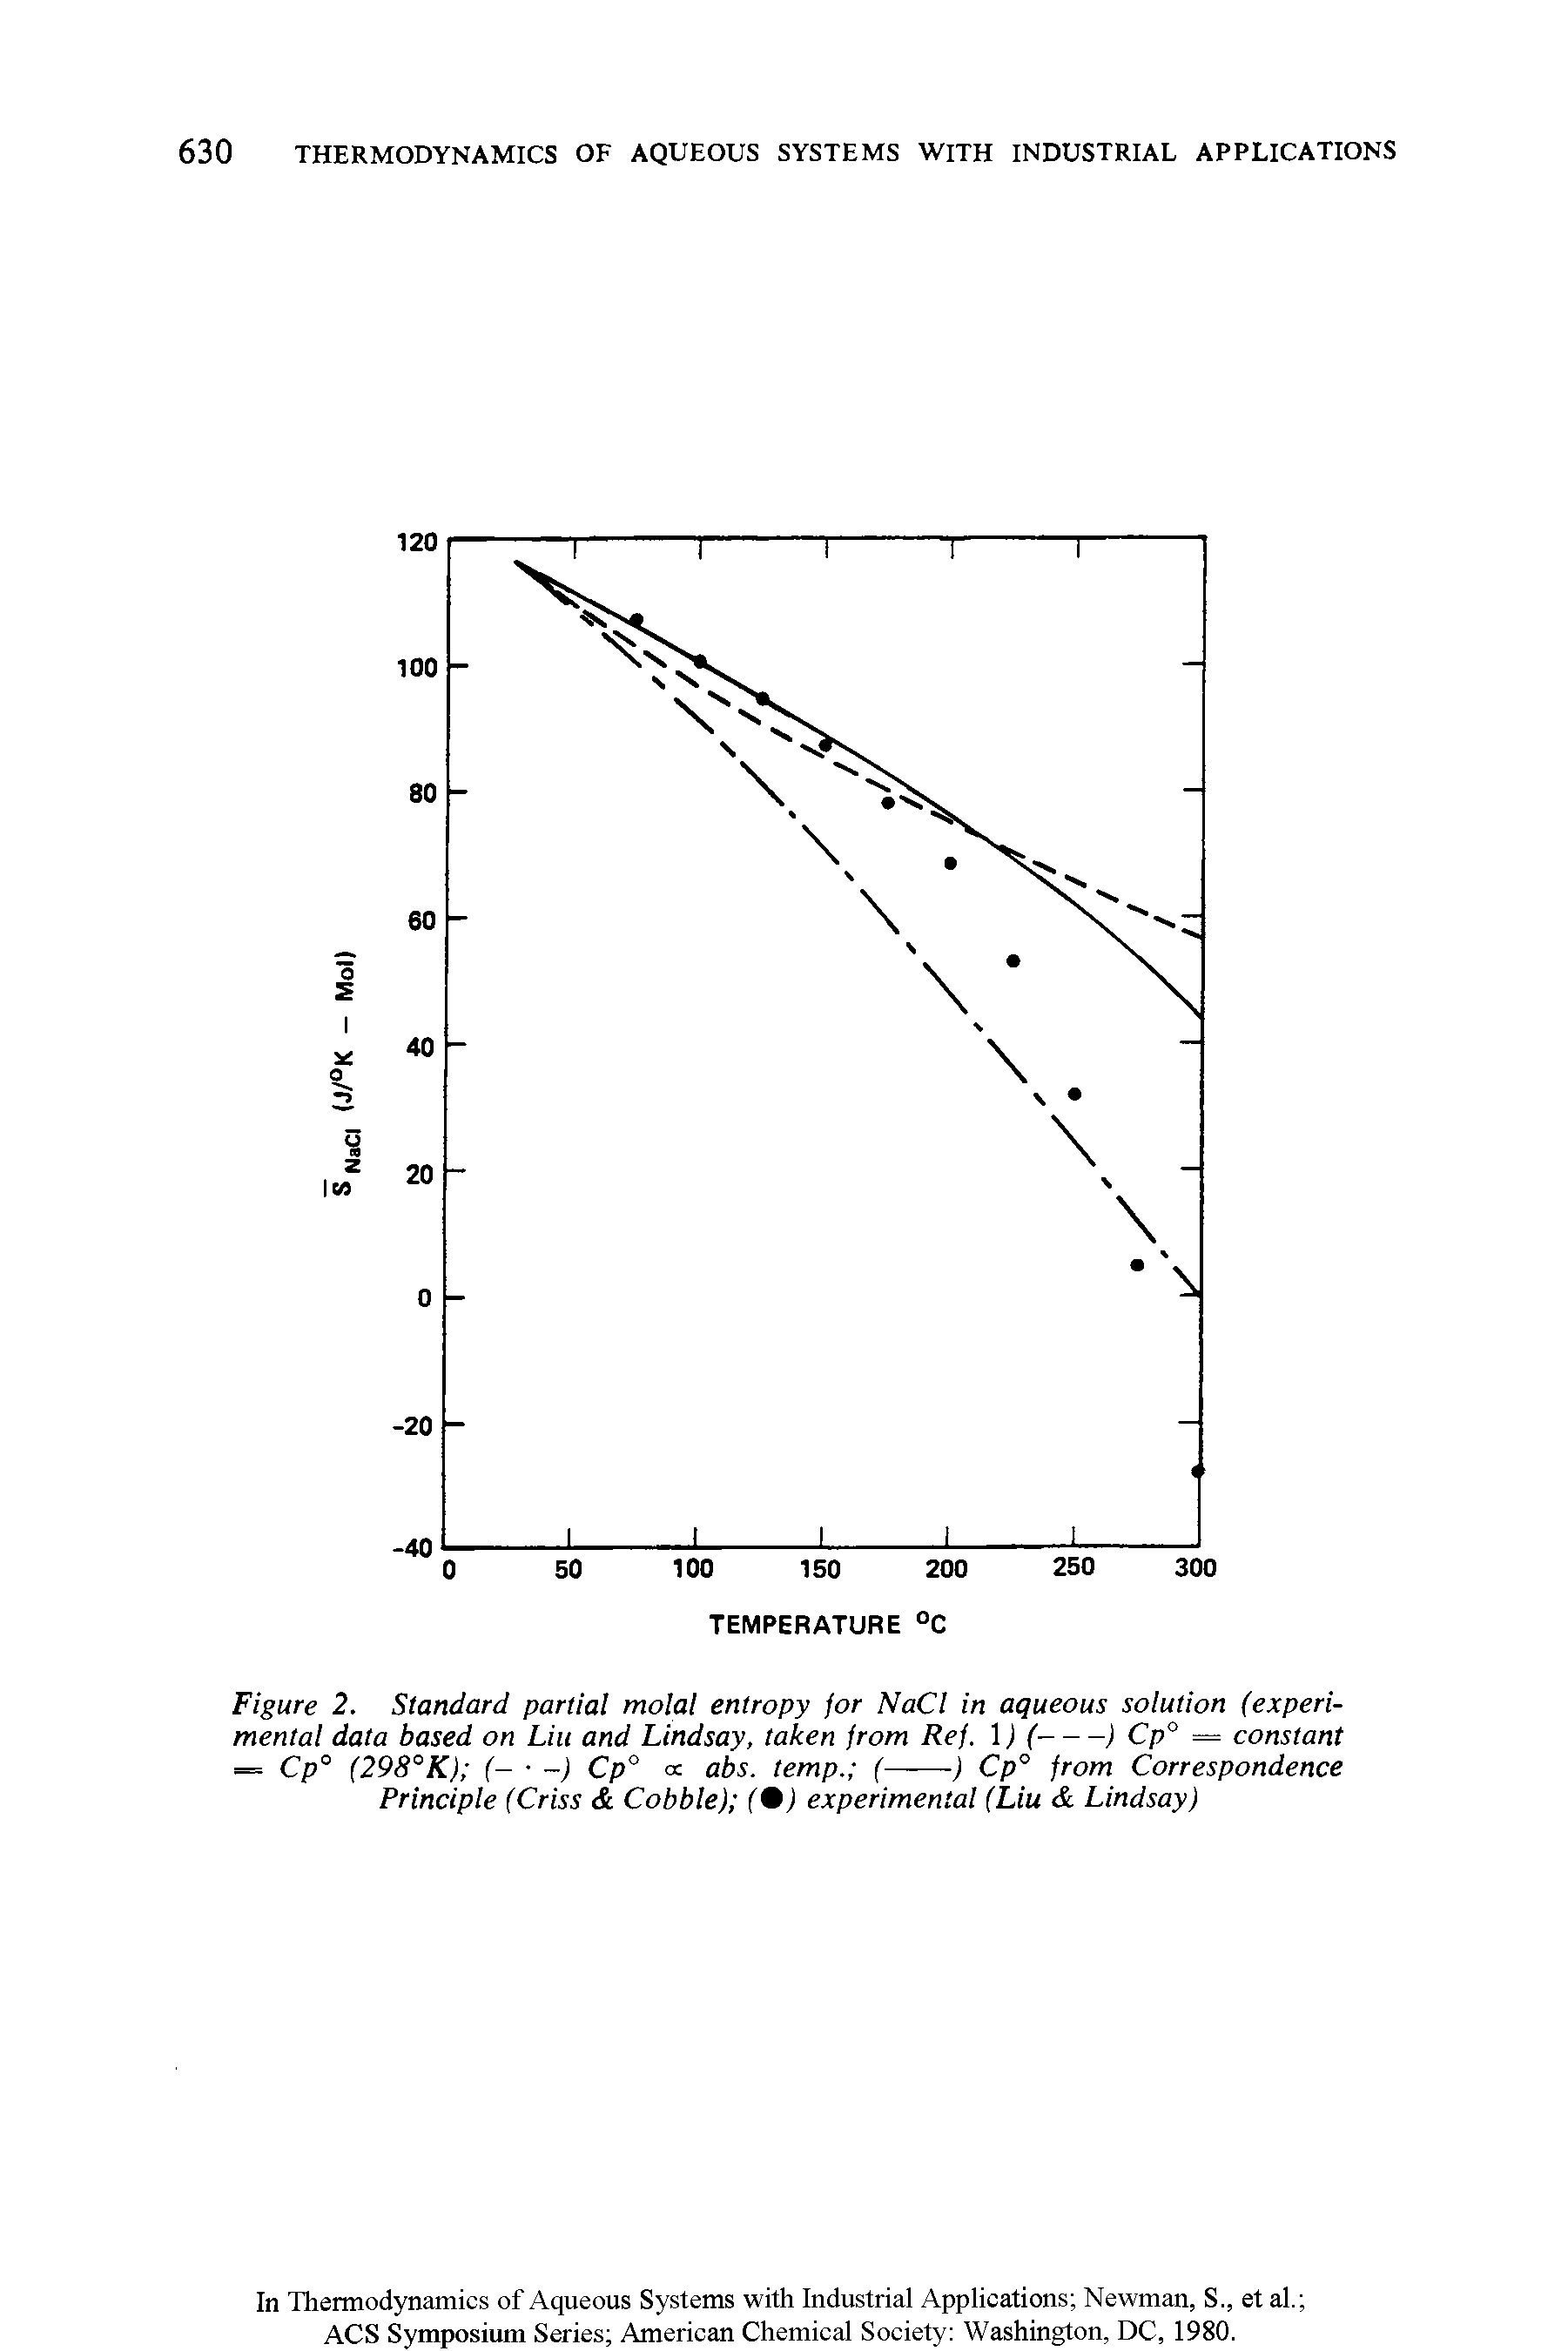 Figure 2. Standard partial molal entropy for NaCl in aqueous solution (experimental data based on Liu and Lindsay, taken from Ref. ) (--) Cp° = constant...